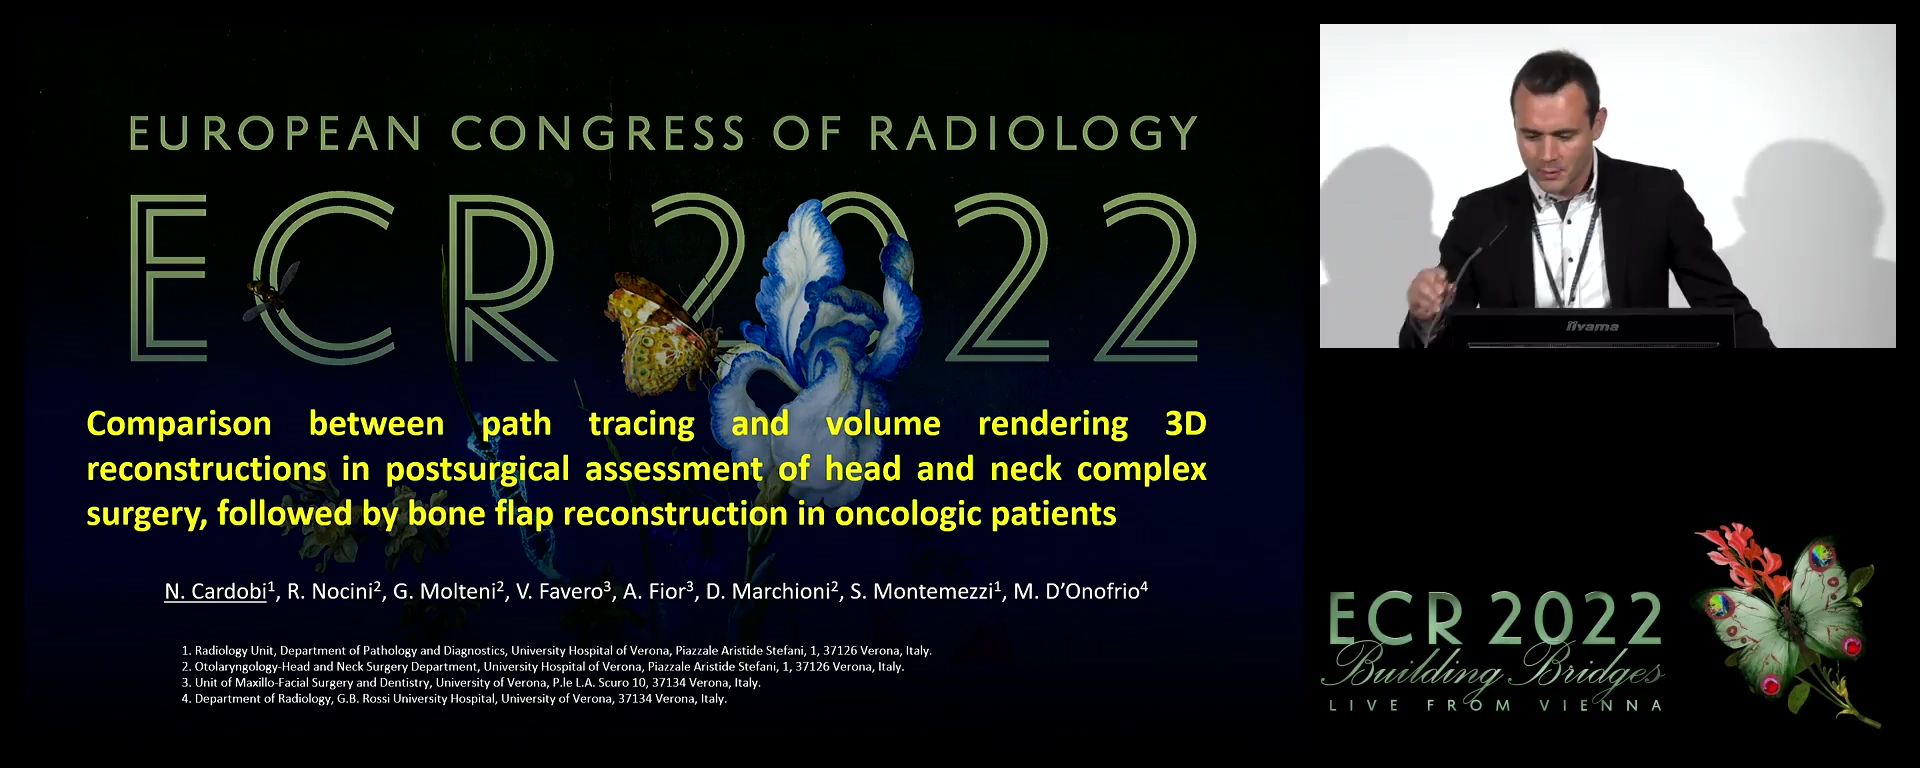 Comparison between path tracing and volume rendering 3D reconstructions in postsurgical assessment of head and neck complex surgery, followed by bone flap reconstruction in oncologic patients